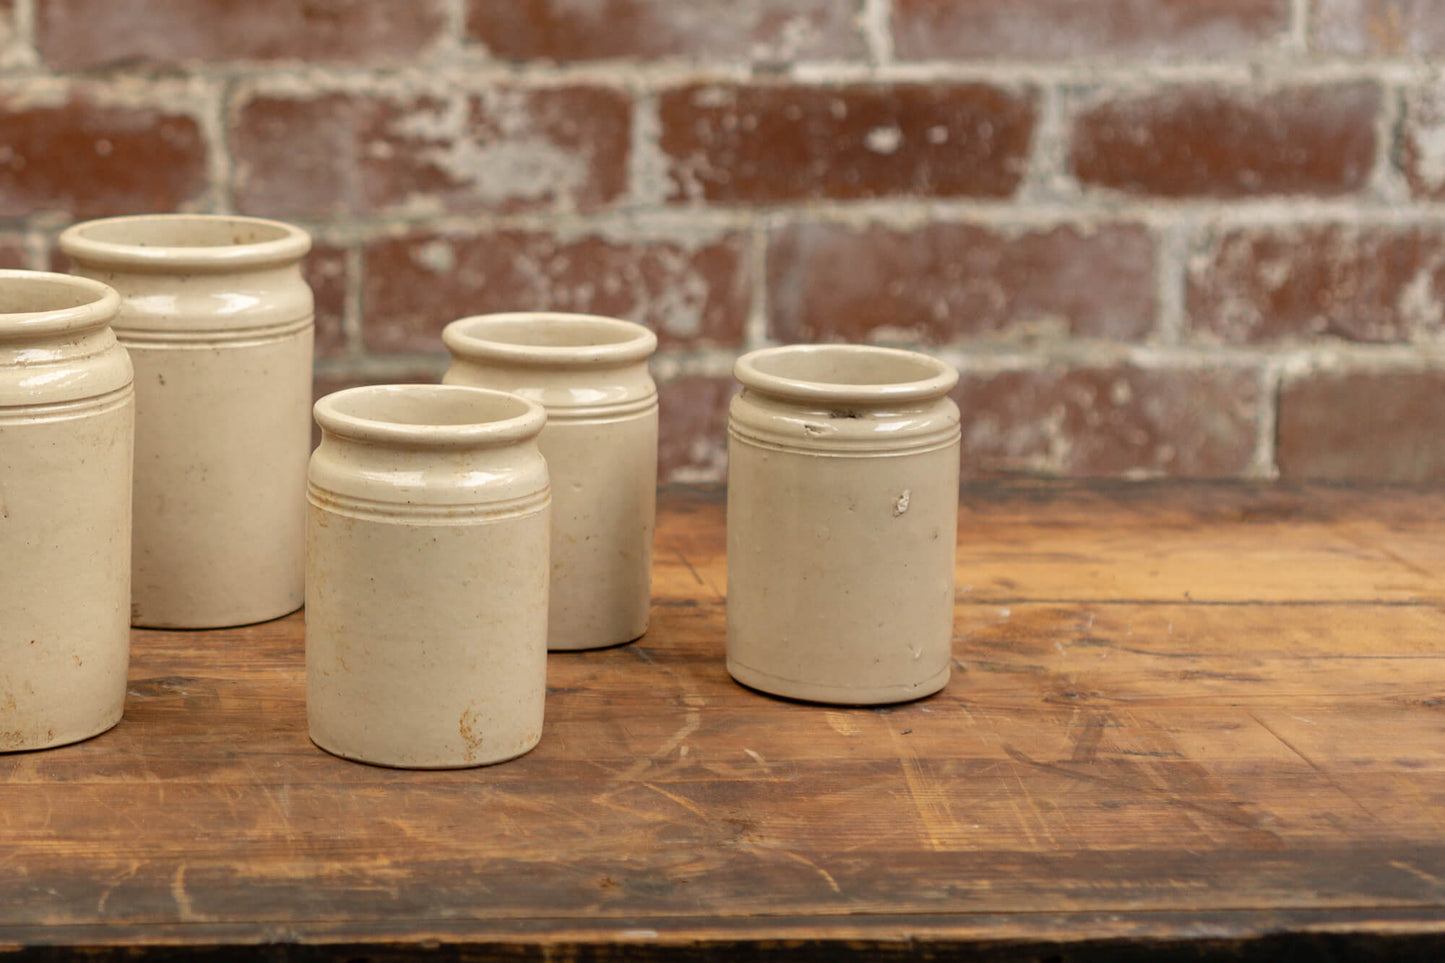 Photo shows 3 various sized salvaged Victorian stoneware jam conserve jars against a brick wall background. The jars are cream coloured with a glaze.